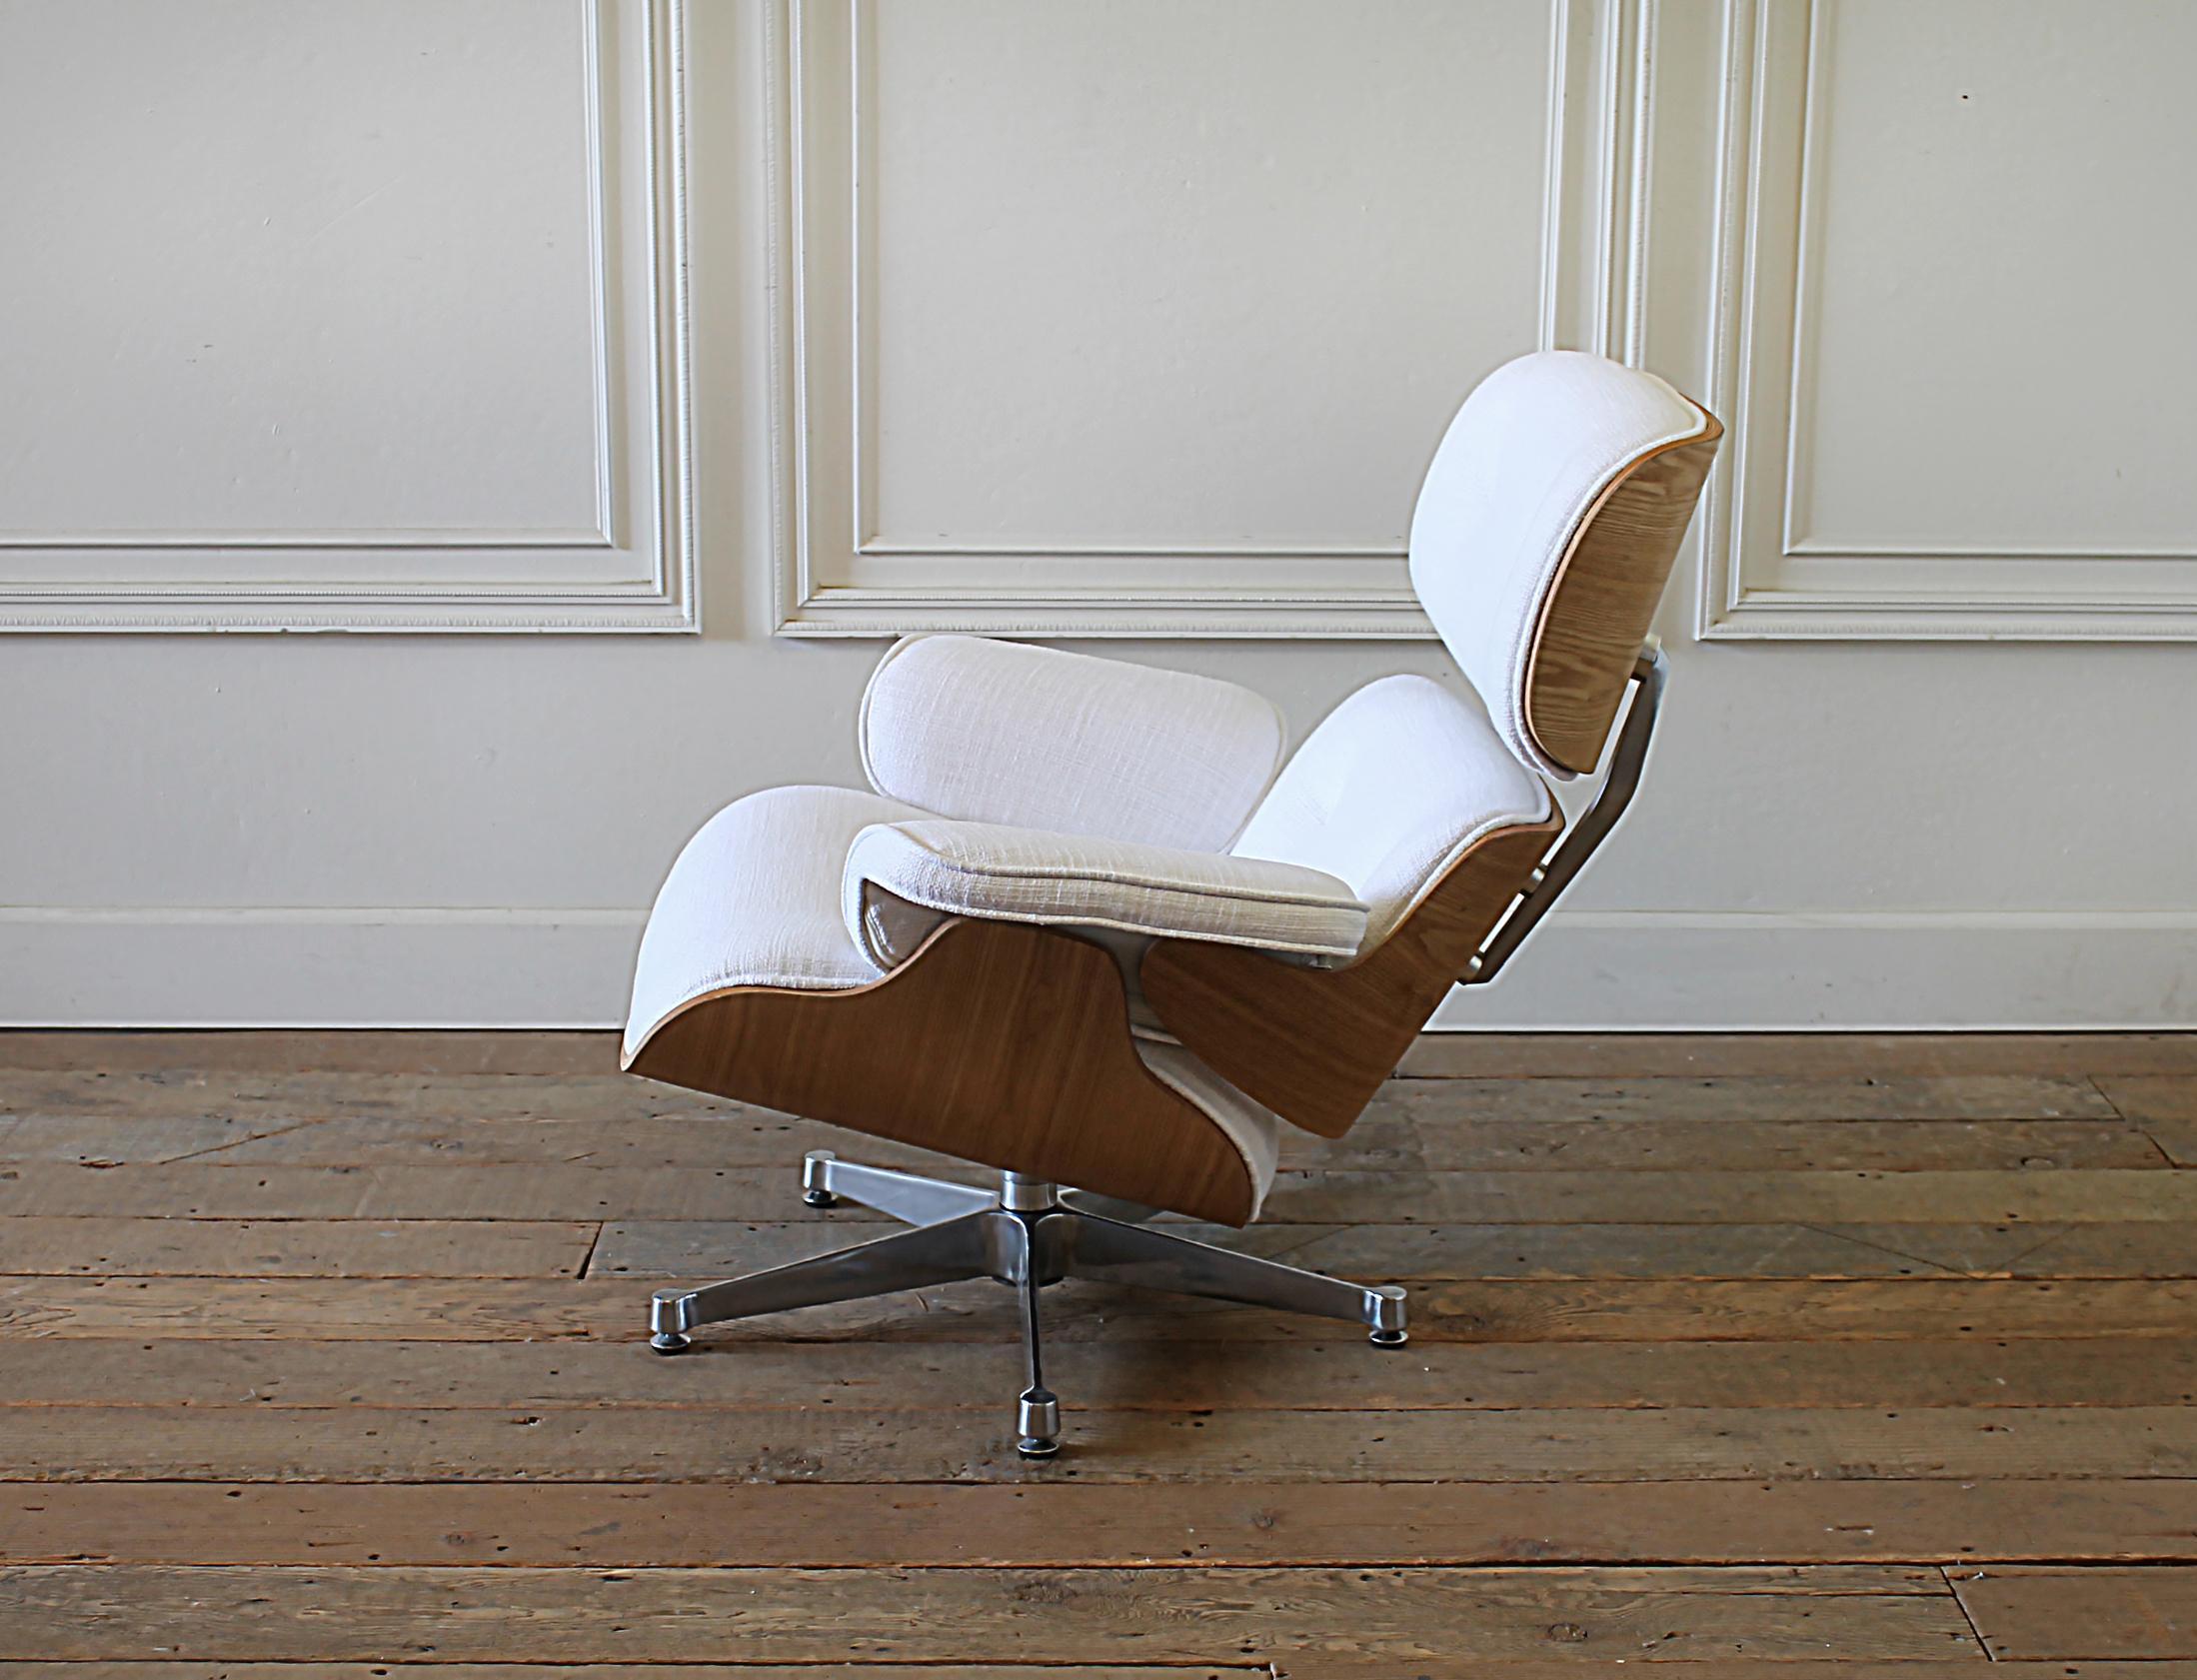 North American Eames Style Chair and Ottoman in Coated White Linen Blend Upholstery